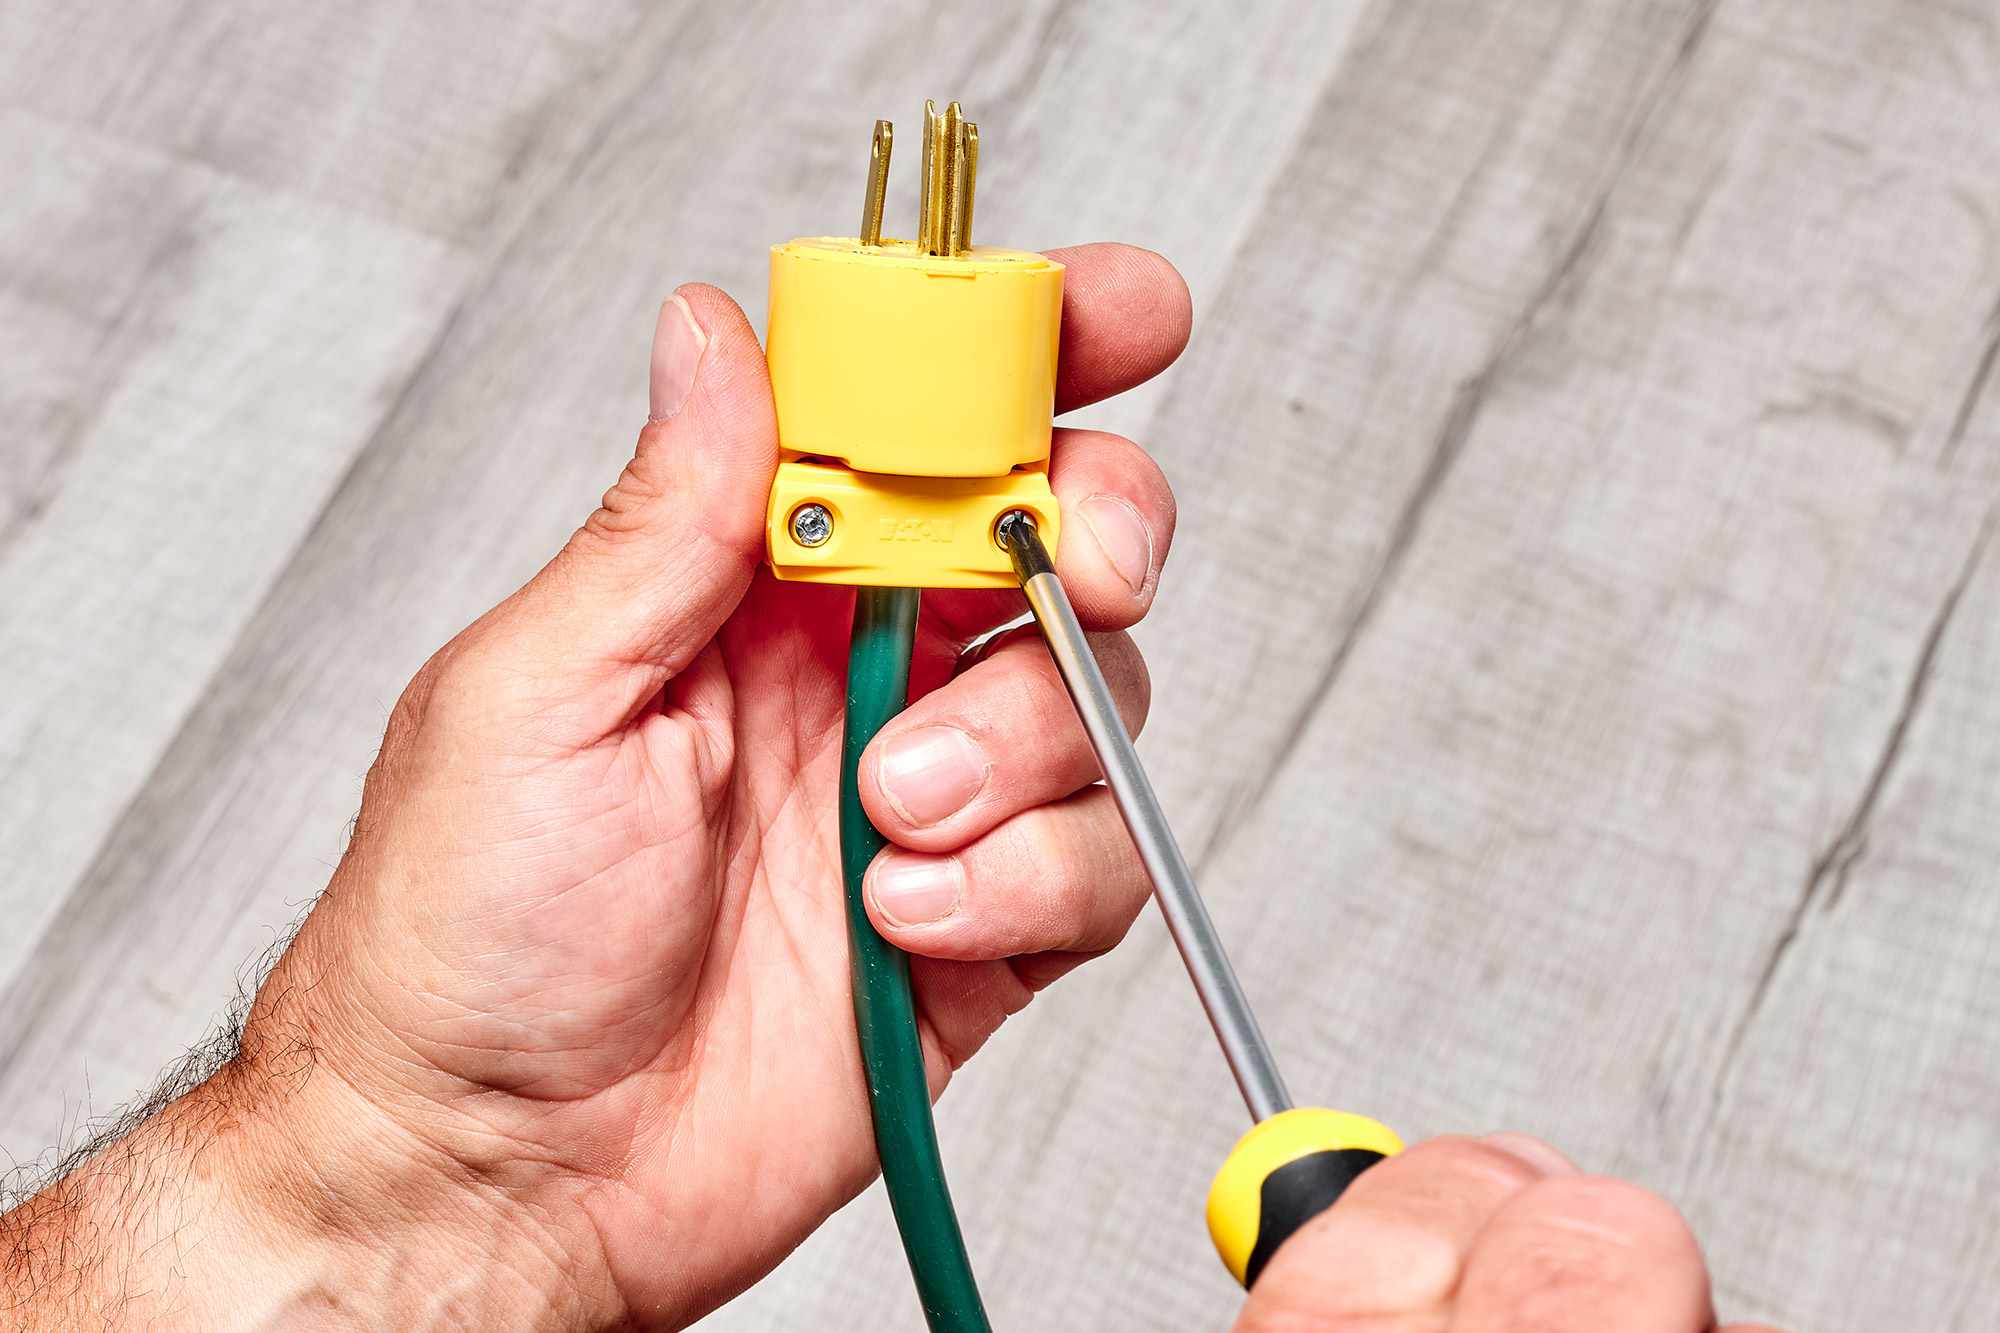 How To Replace Plug On Extension Cord